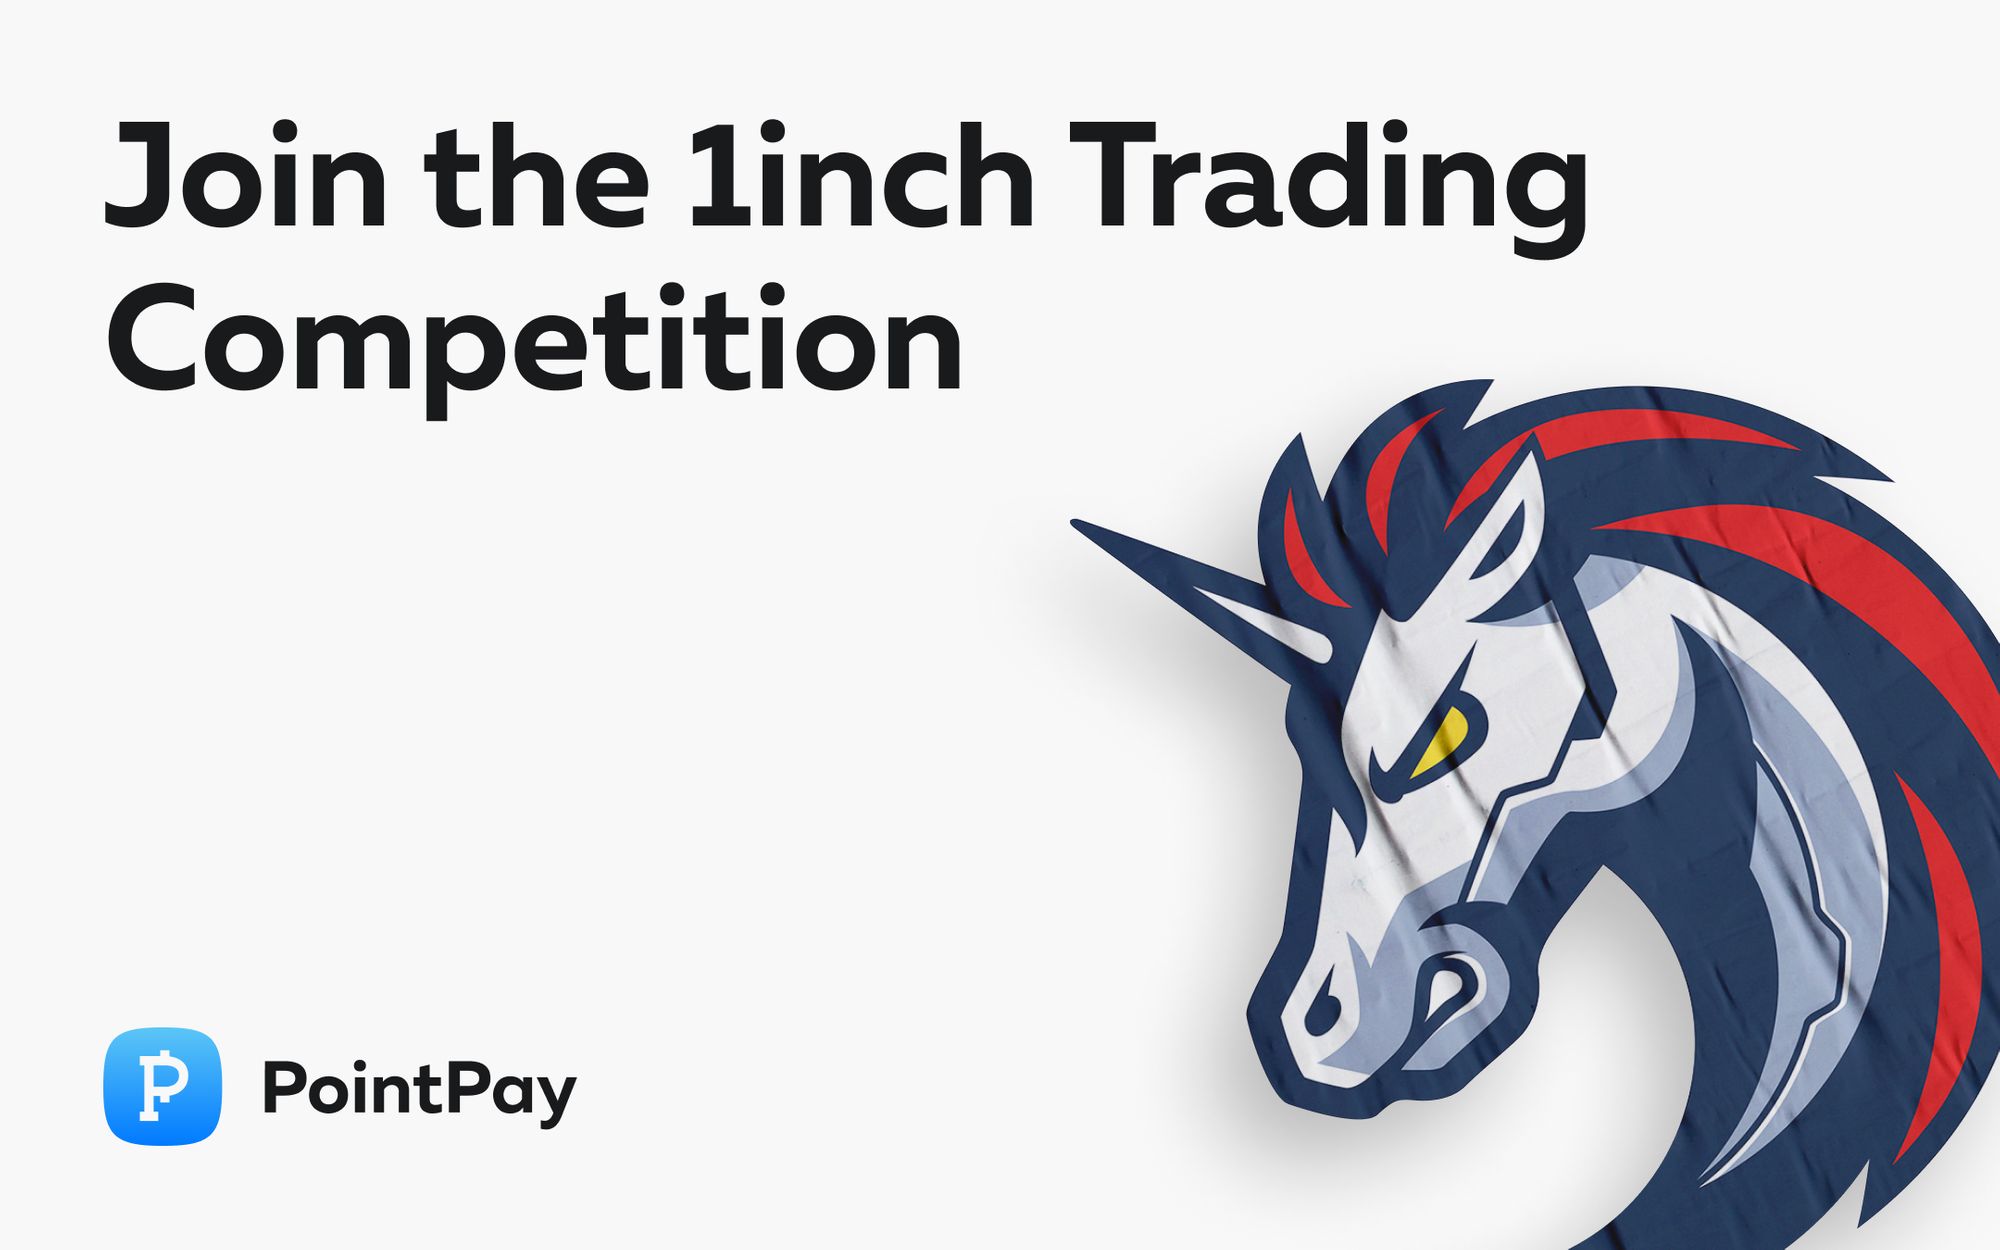 1inch Trading competition has kicked off on PointPay!